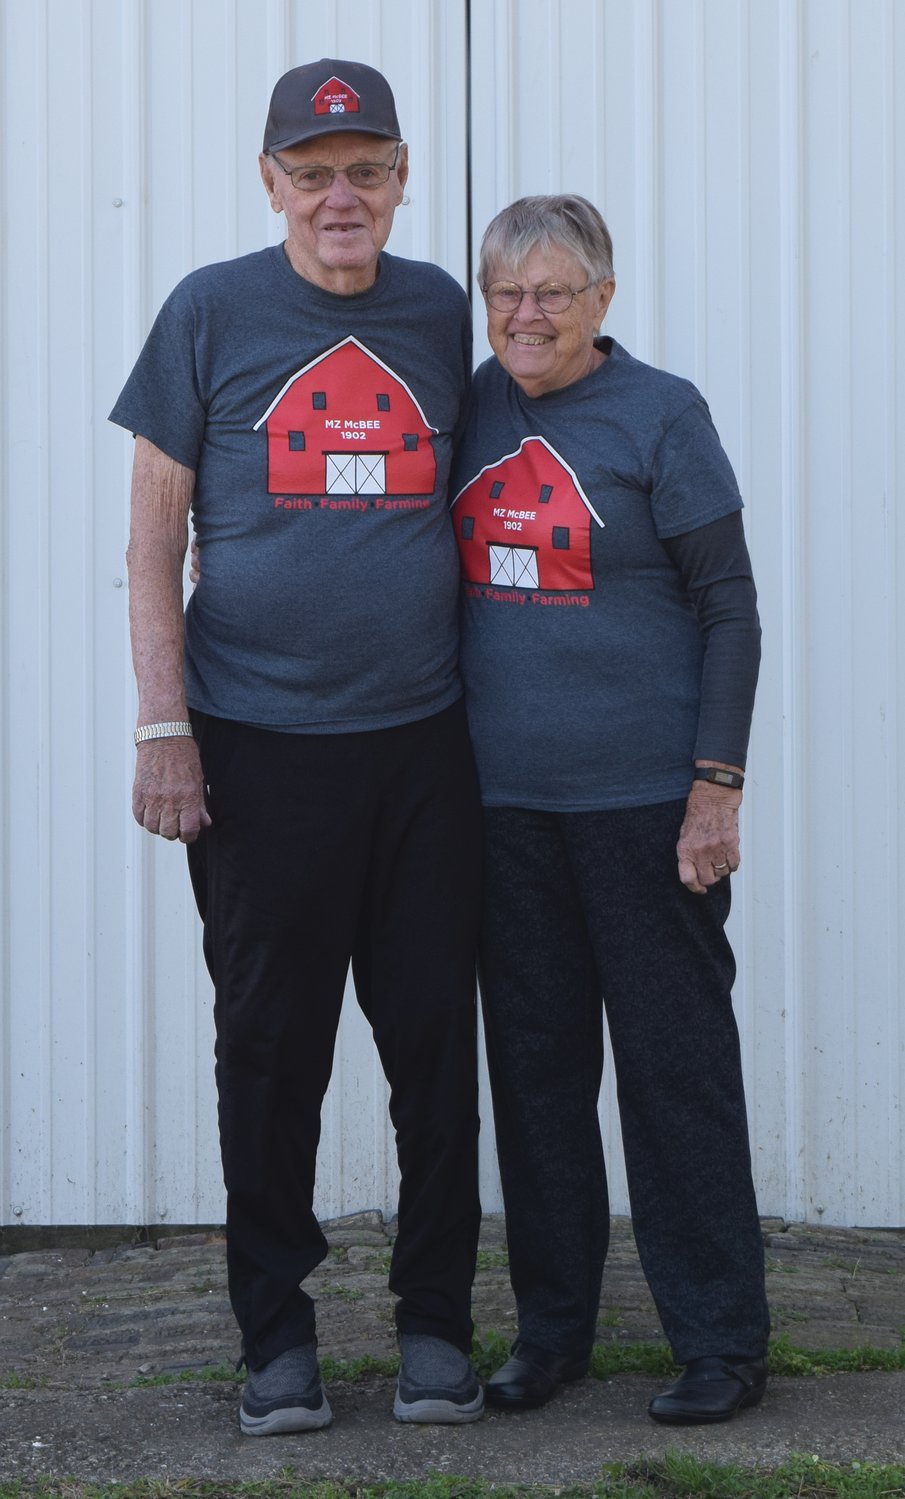 Jerry and Nancy McBee experienced many joys and challenges during their 65 years of farming.